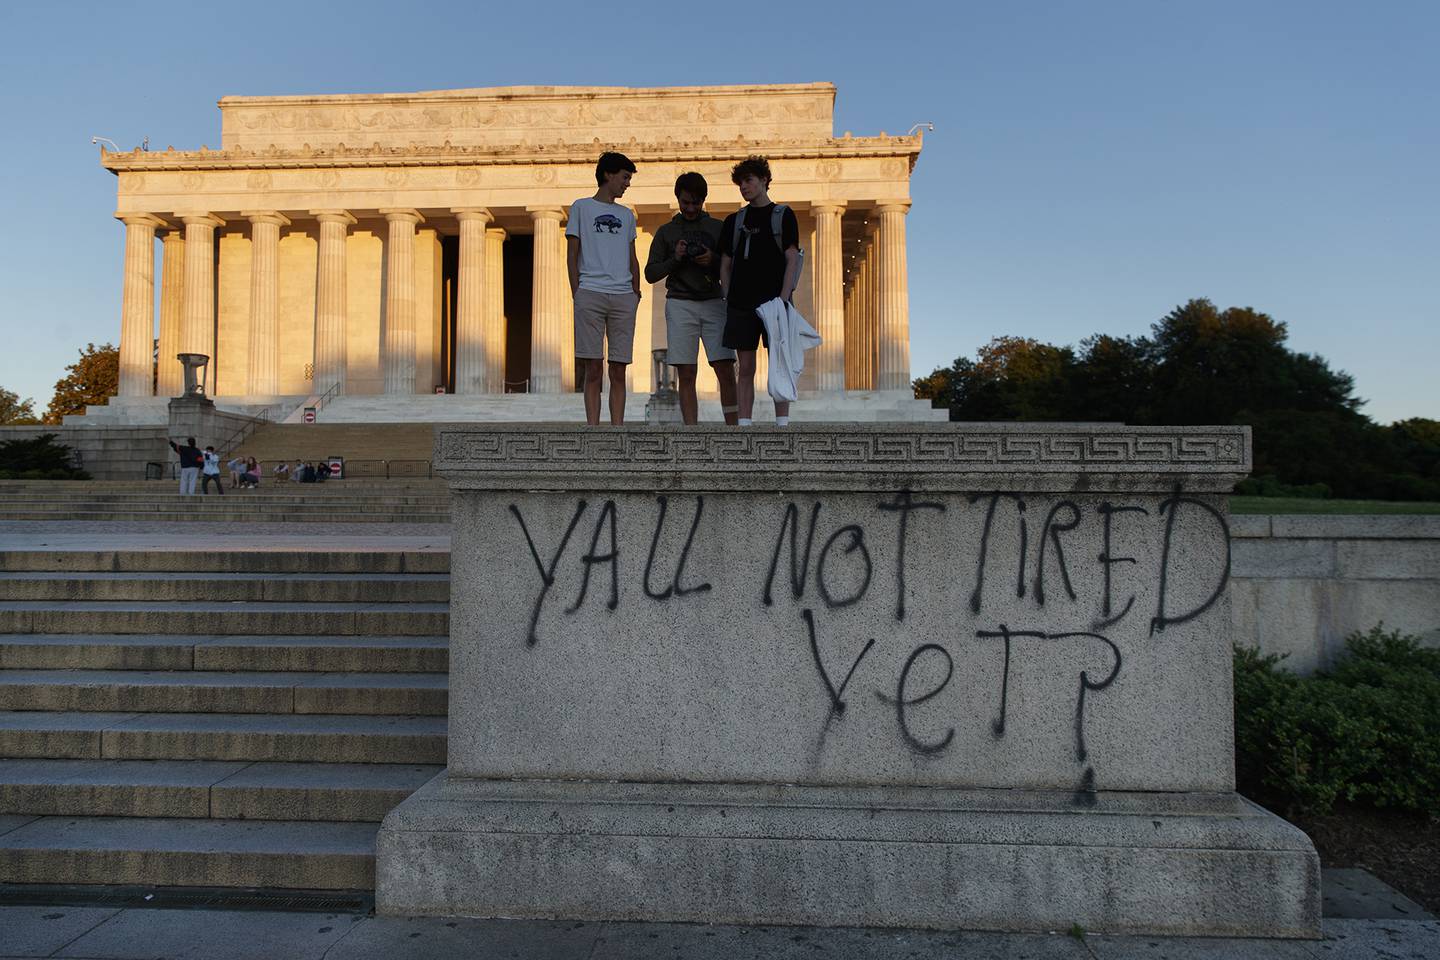 Spray paint that reads "Yall Not Tired Yet?" is seen on the base of the Lincoln Memorial on the National Mall in Washington, early Sunday, May 31, 2020, the morning after protests over the death of George Floyd.